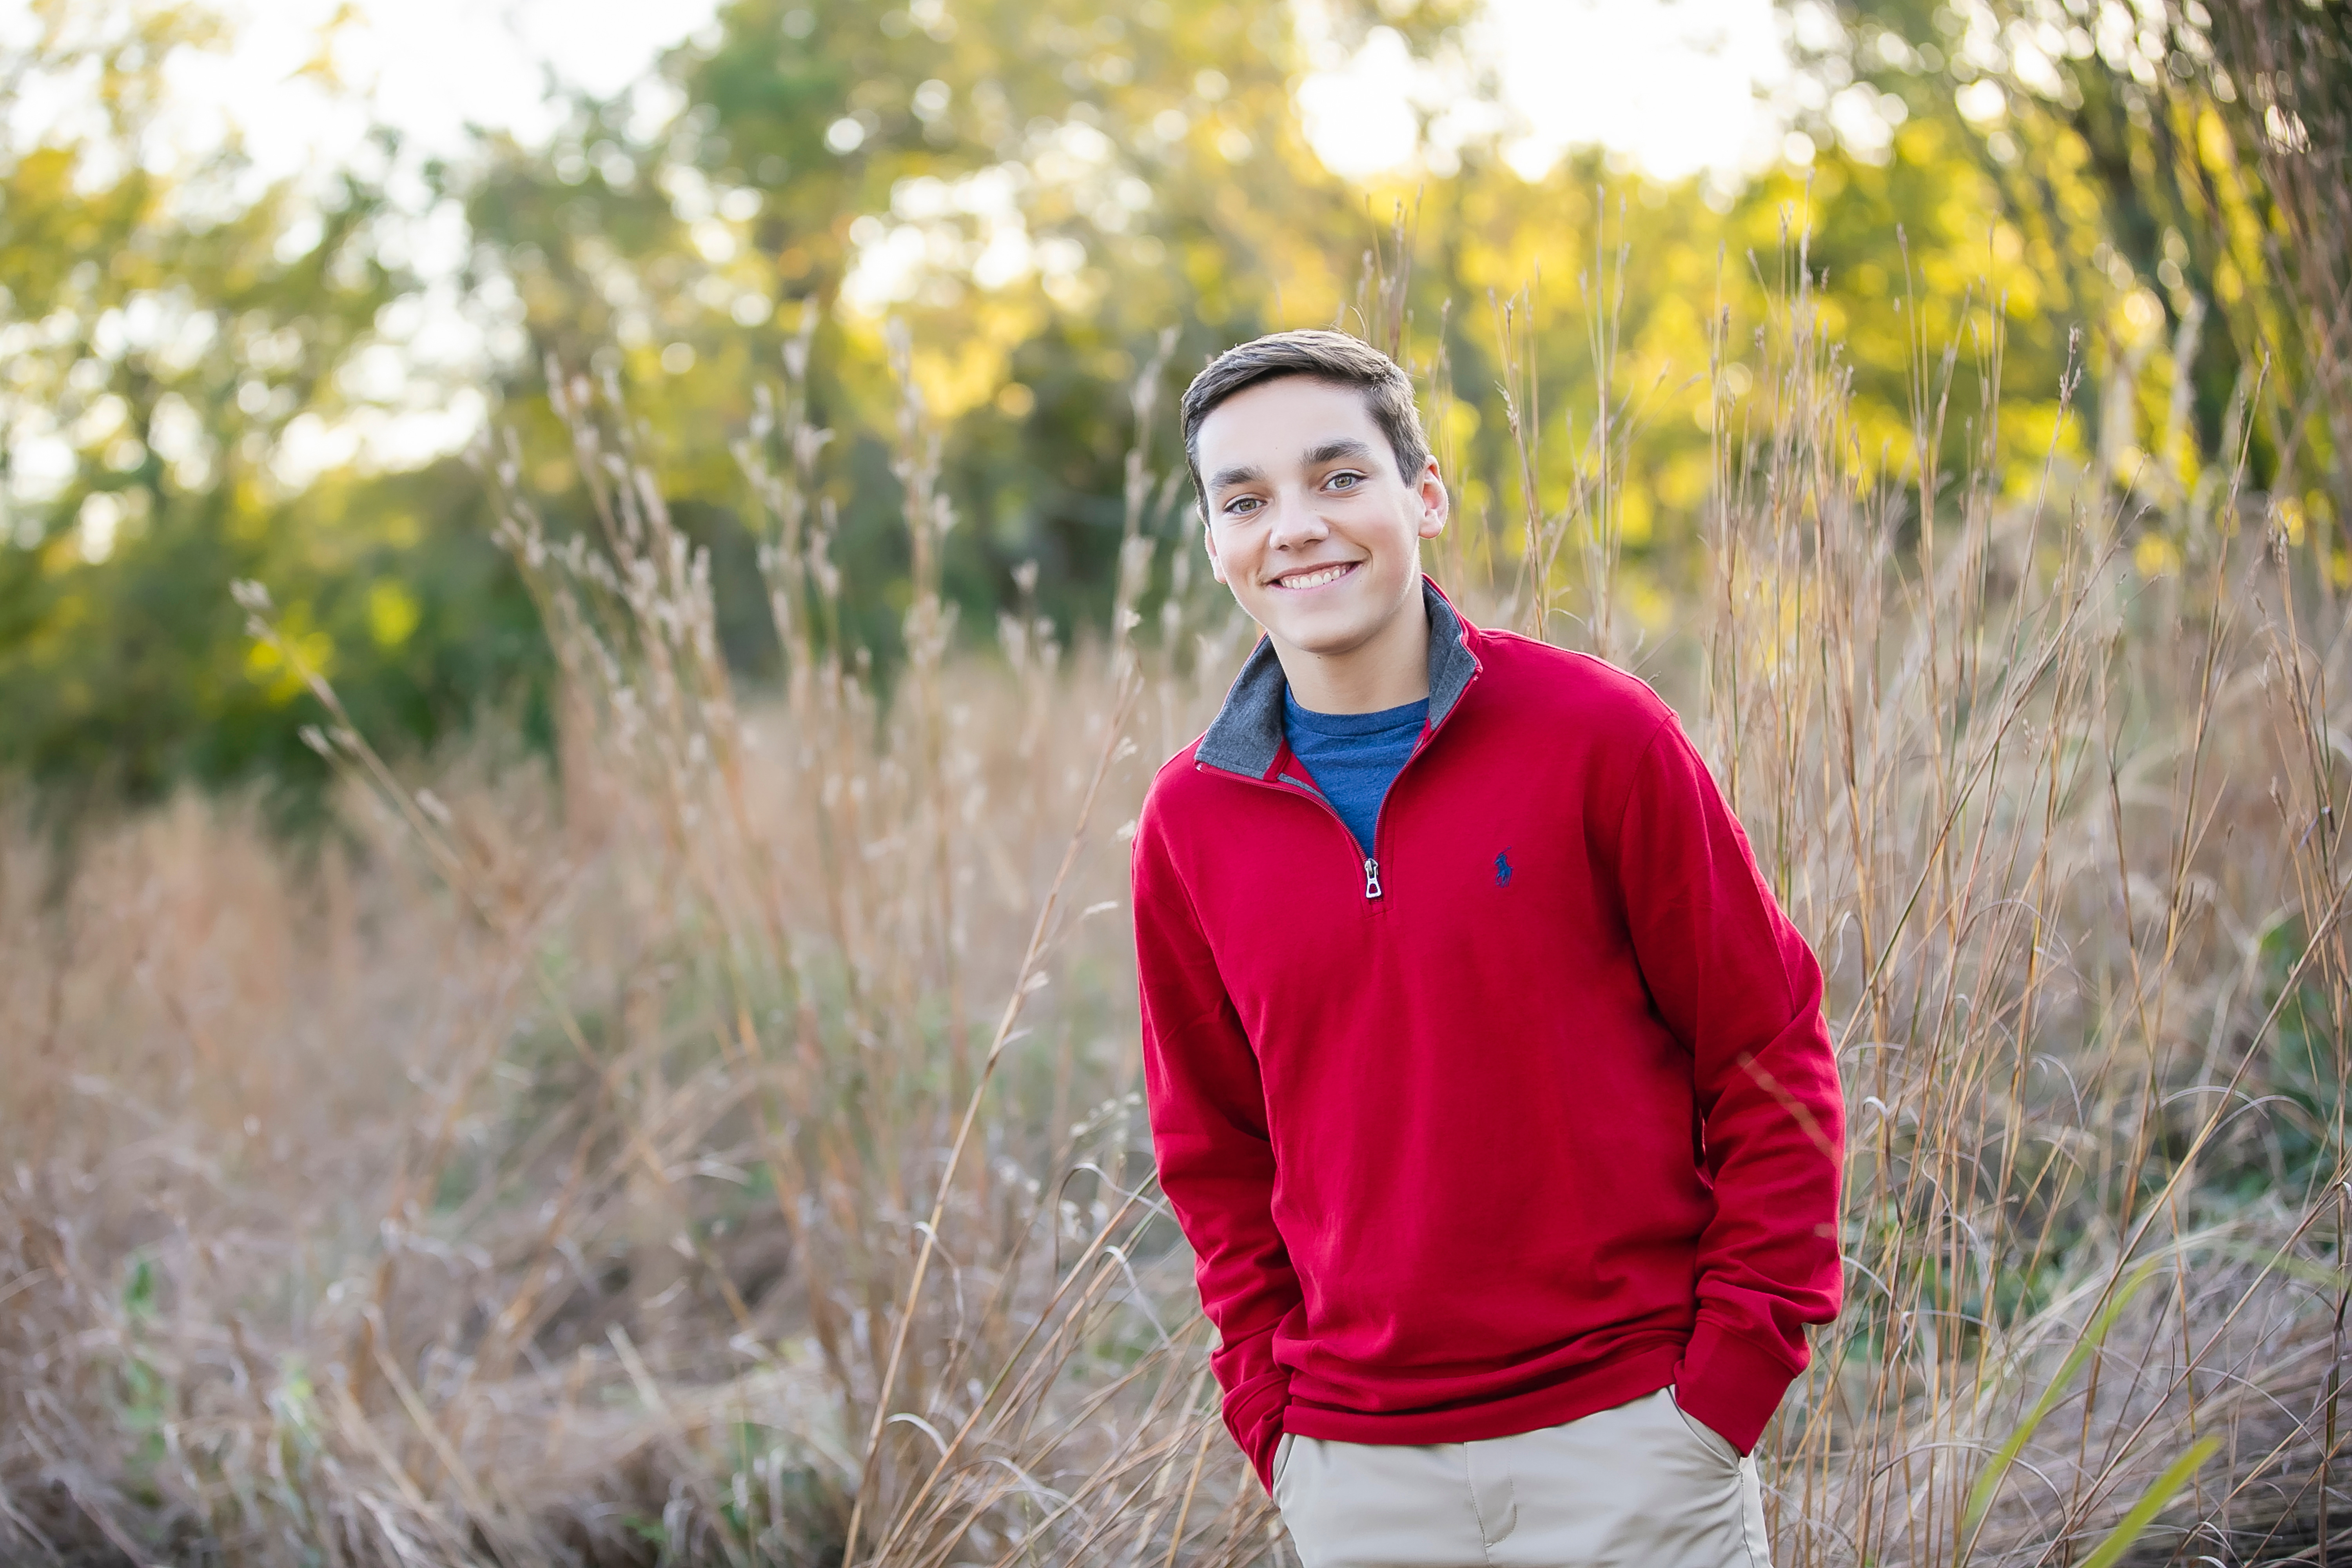 Grant Cline, wearing a red and blue sweatshirt, stands in a field of tall grass.